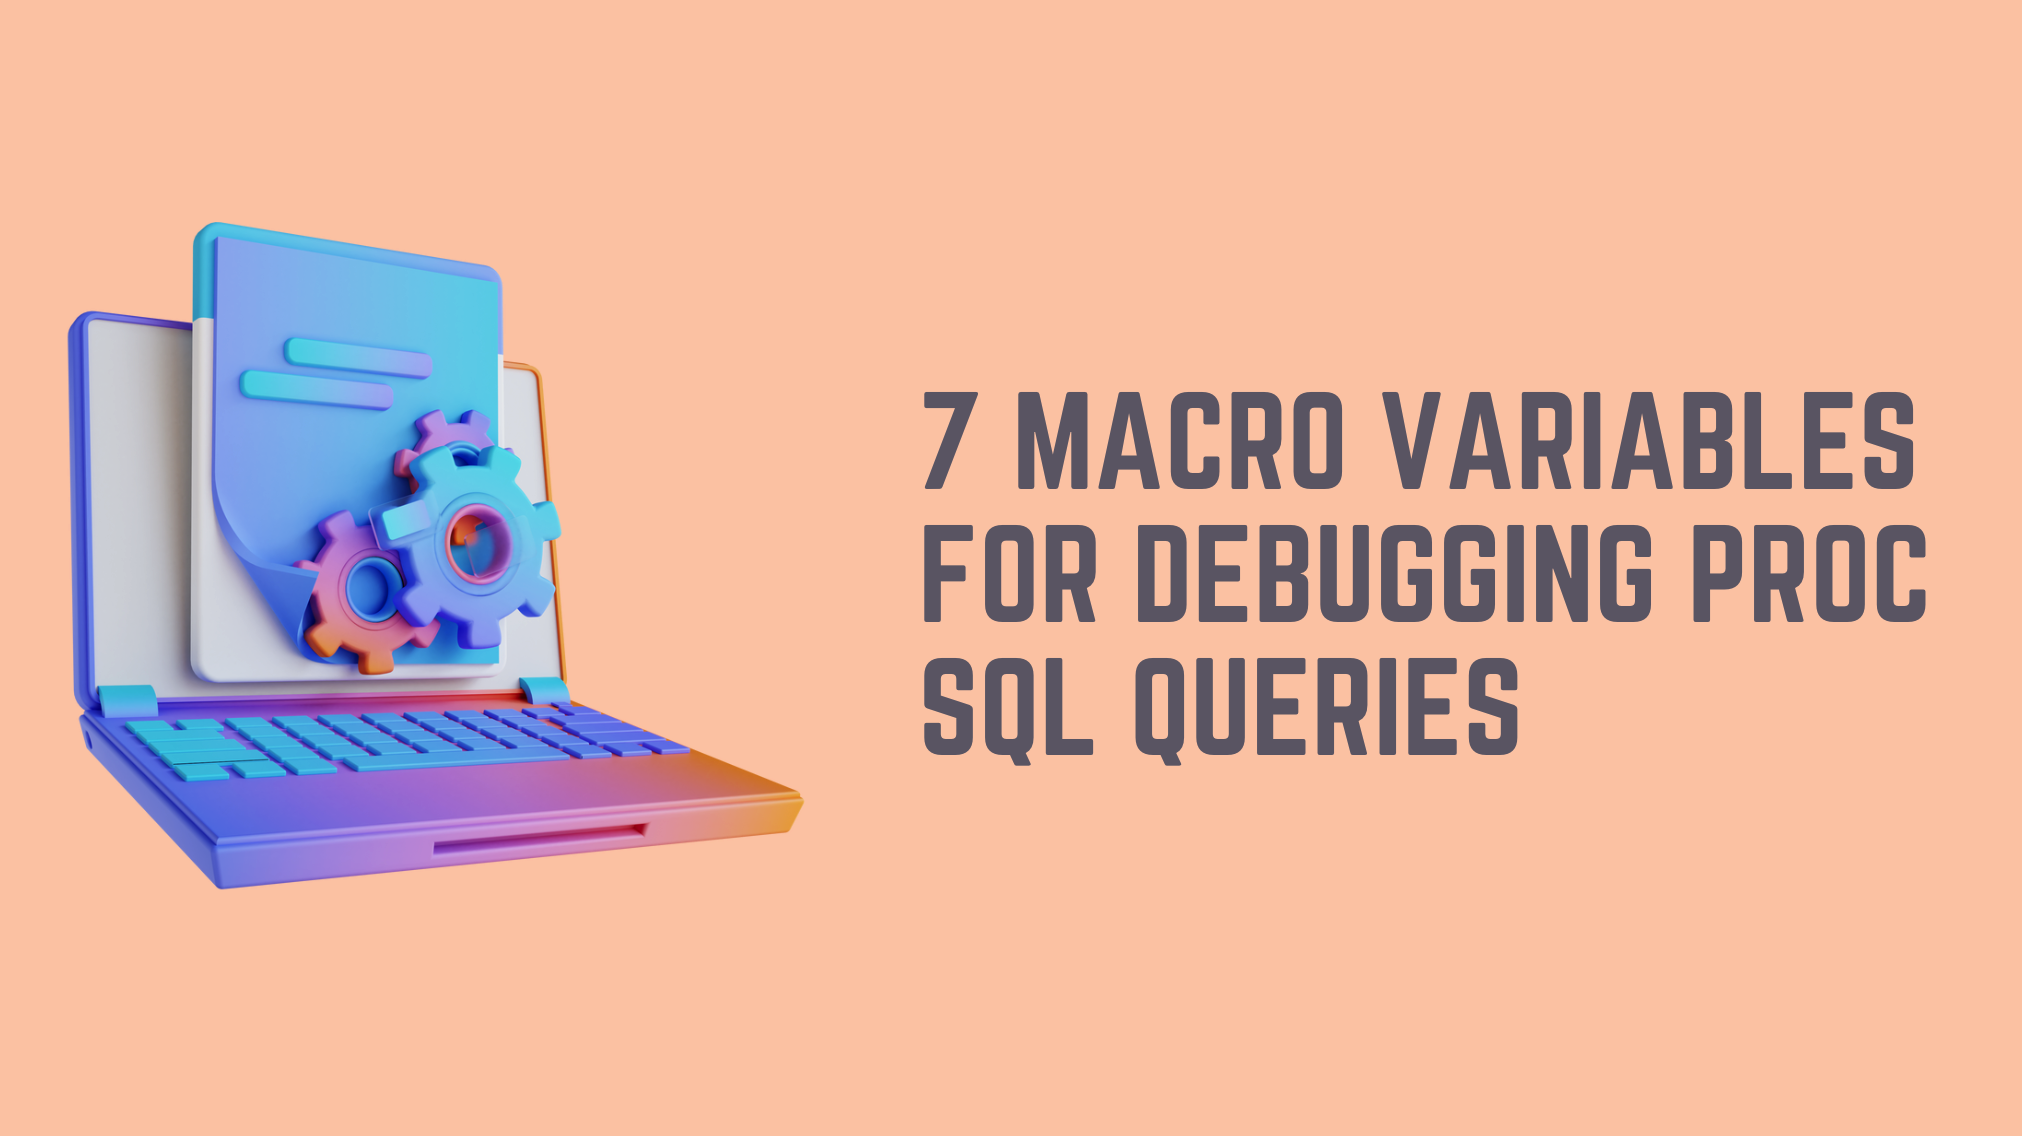 Troubleshoot Your Proc SQL Code Like a Pro with These 7 Automatic Macro Variables